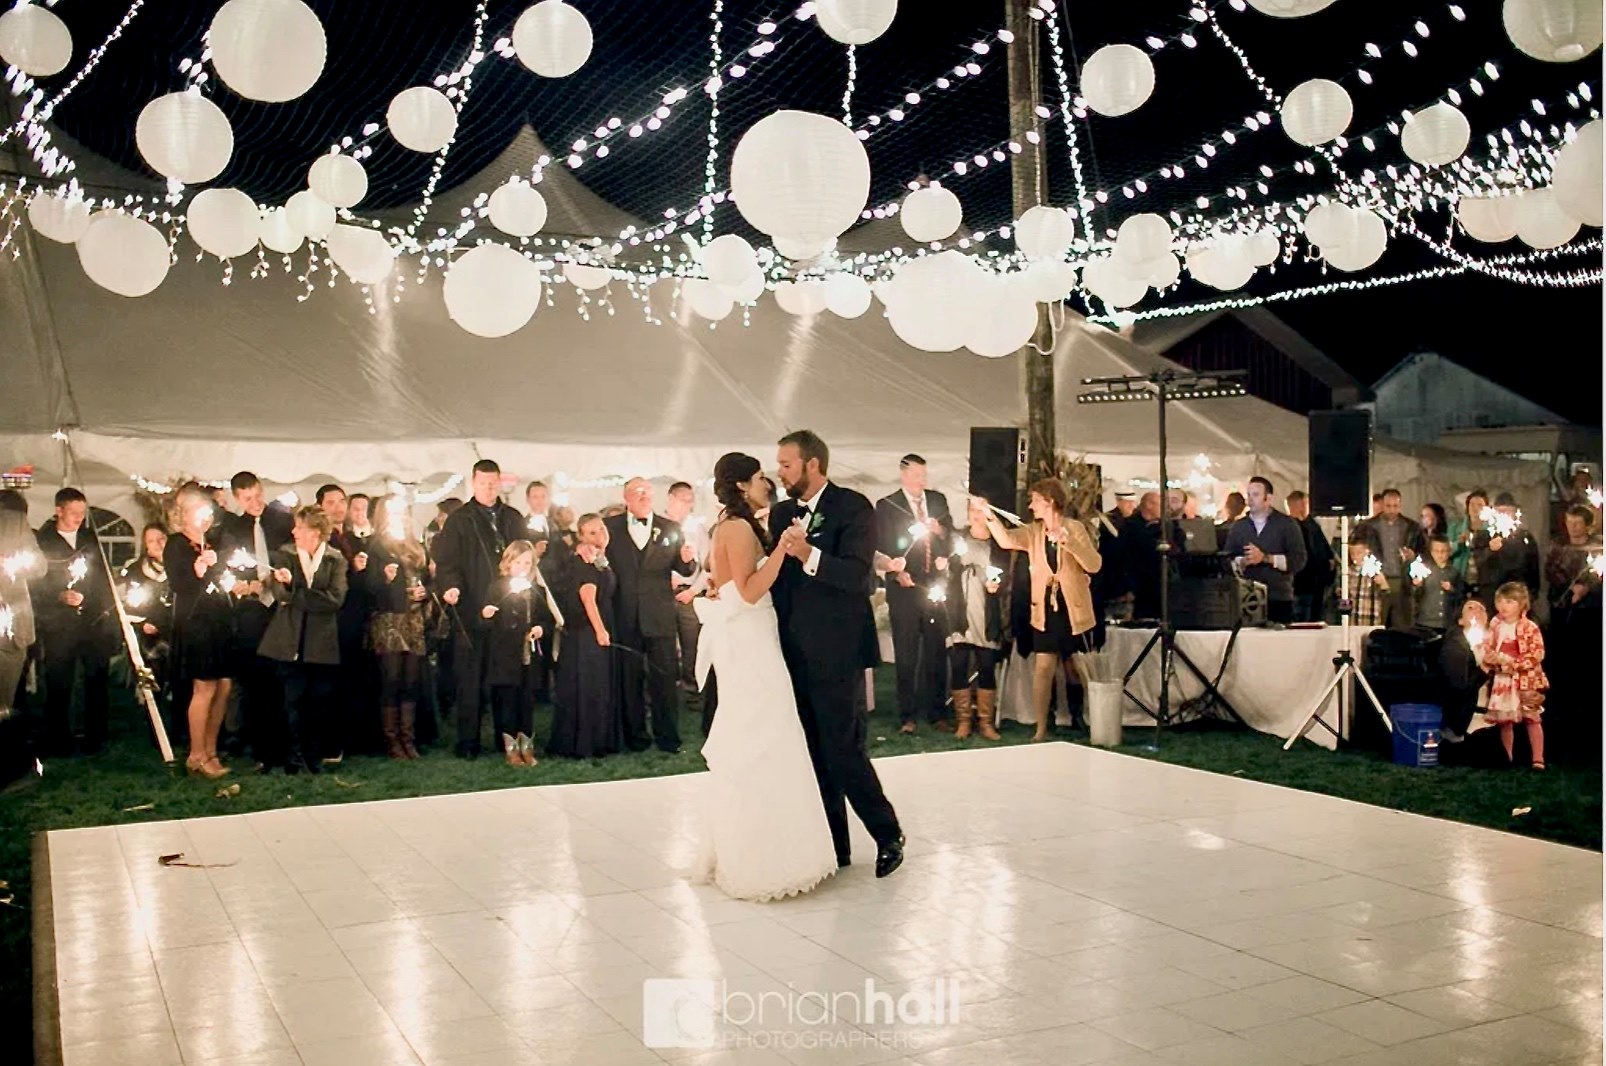 Slate White style dance floor shines at this beautiful wedding.